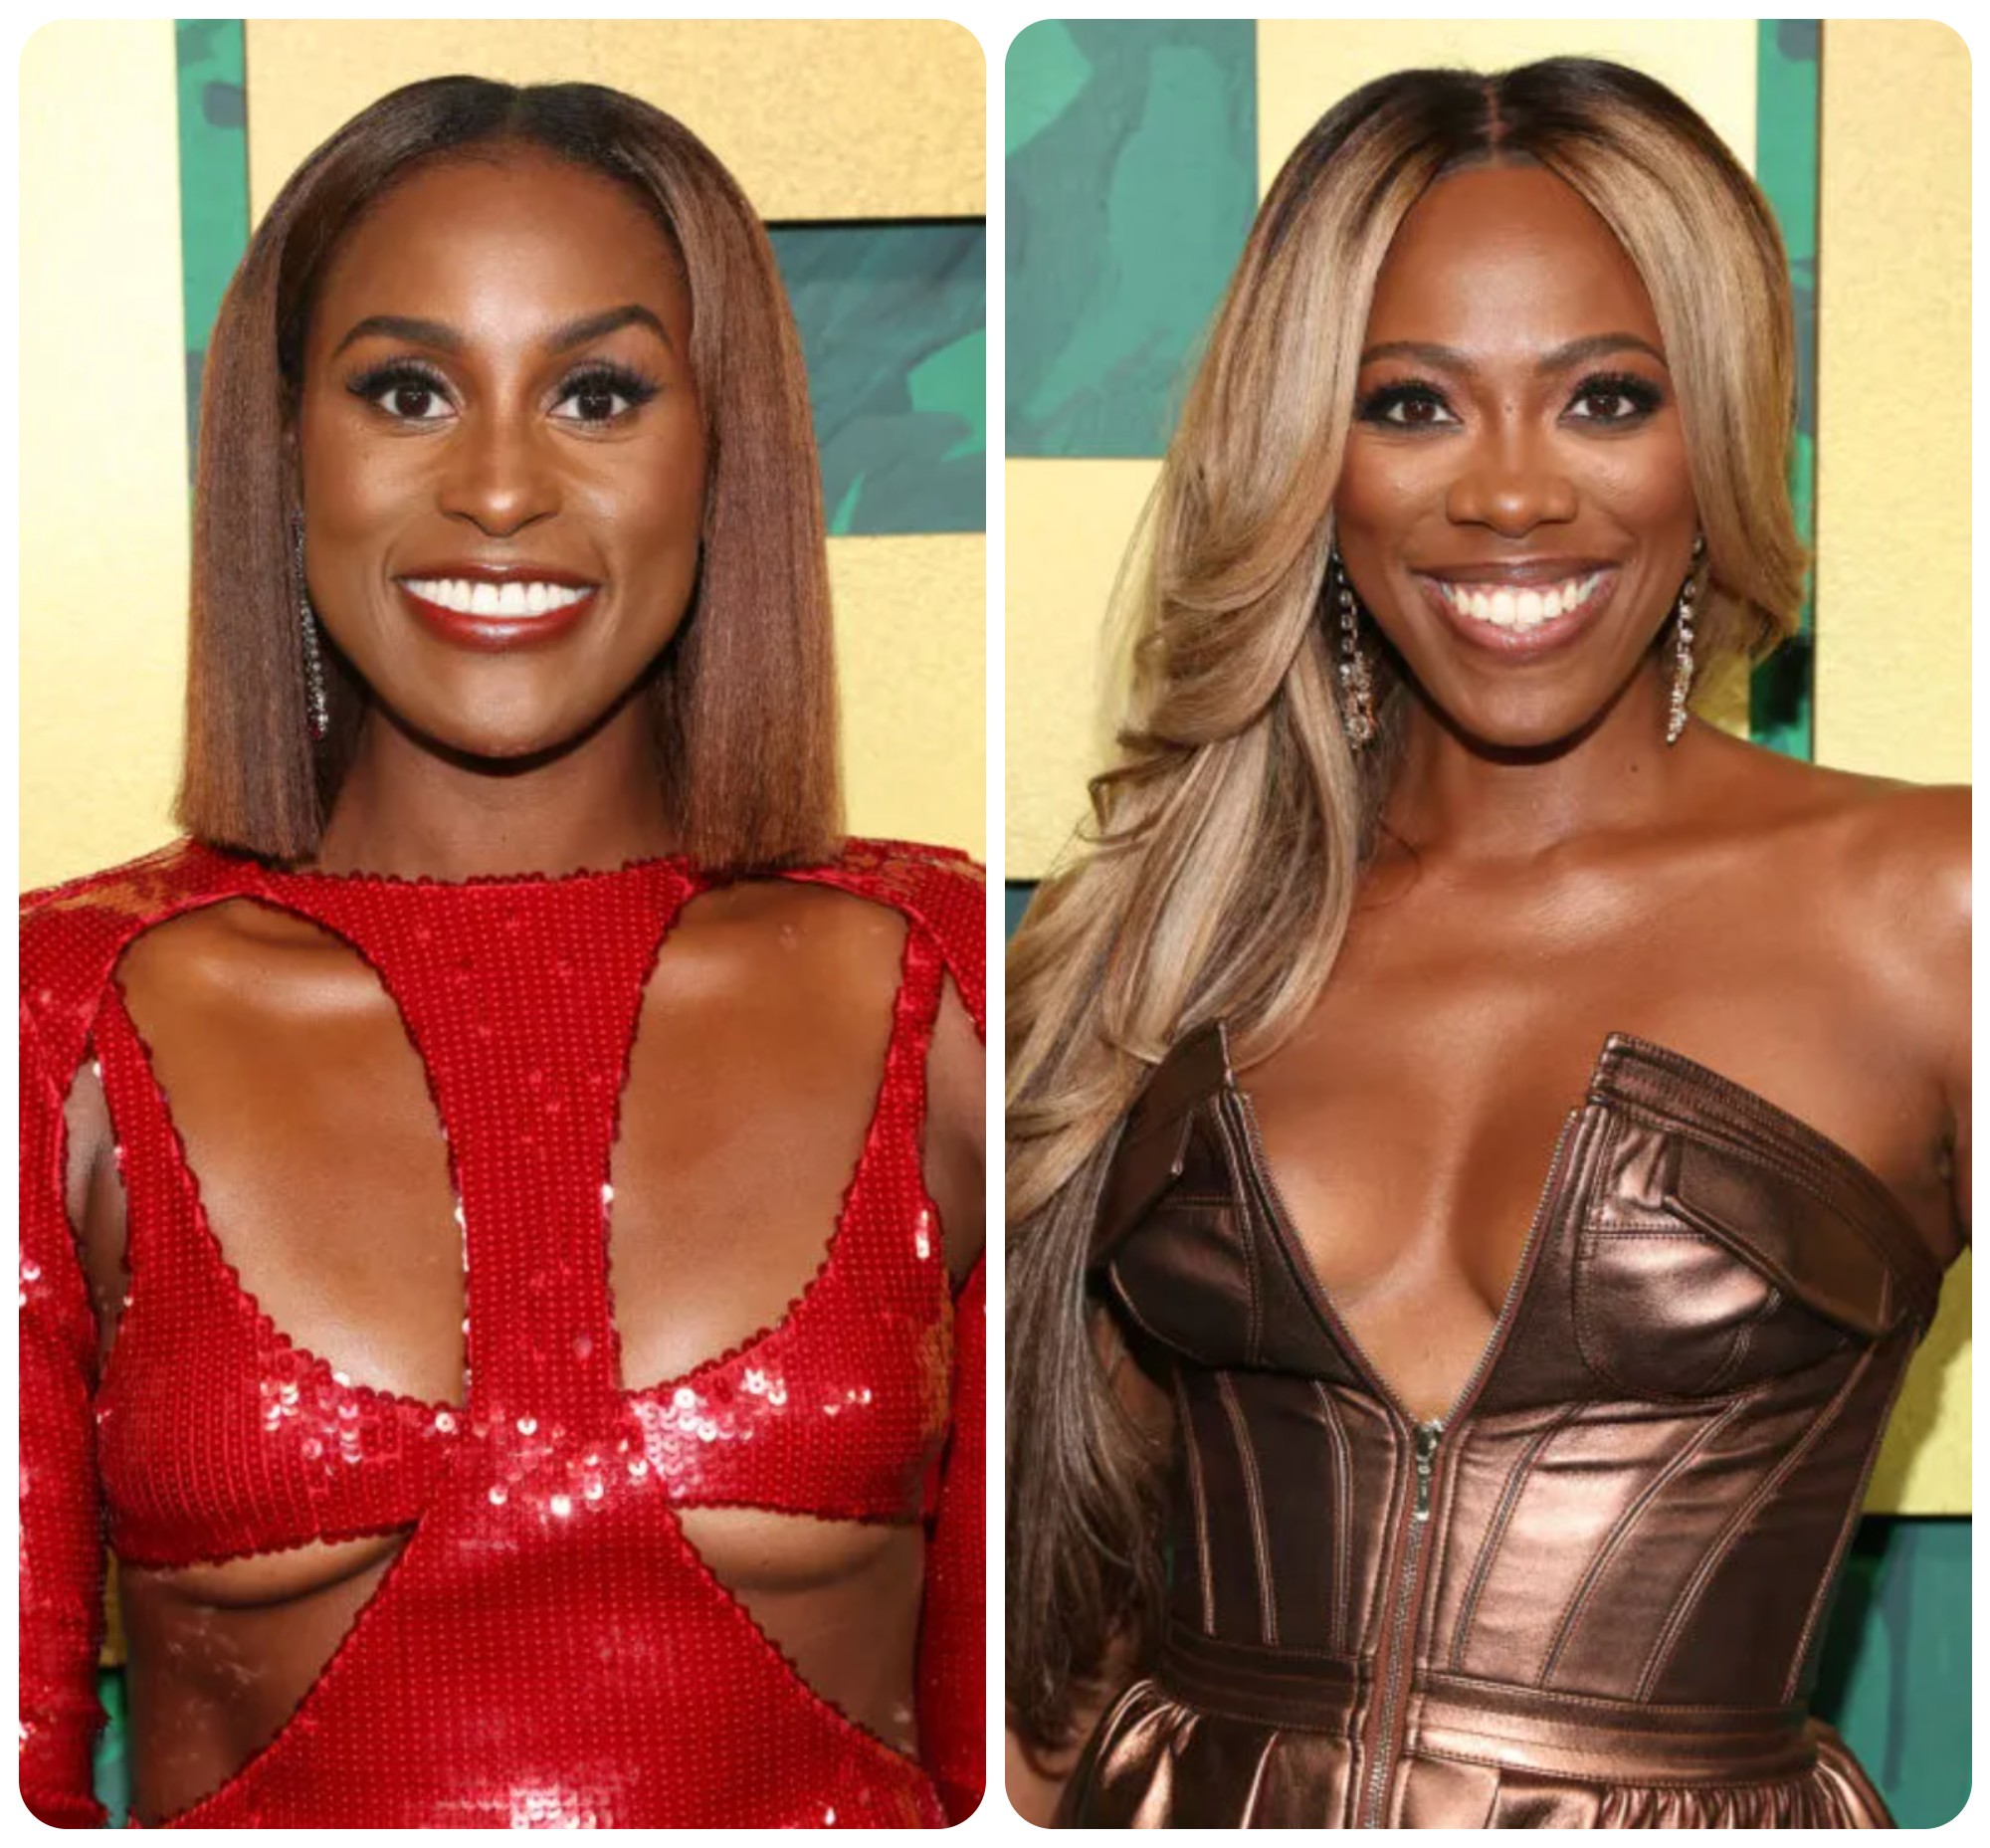 Issa Rae & Yvonne Orji Party At Annual Yacht Sh*t Party